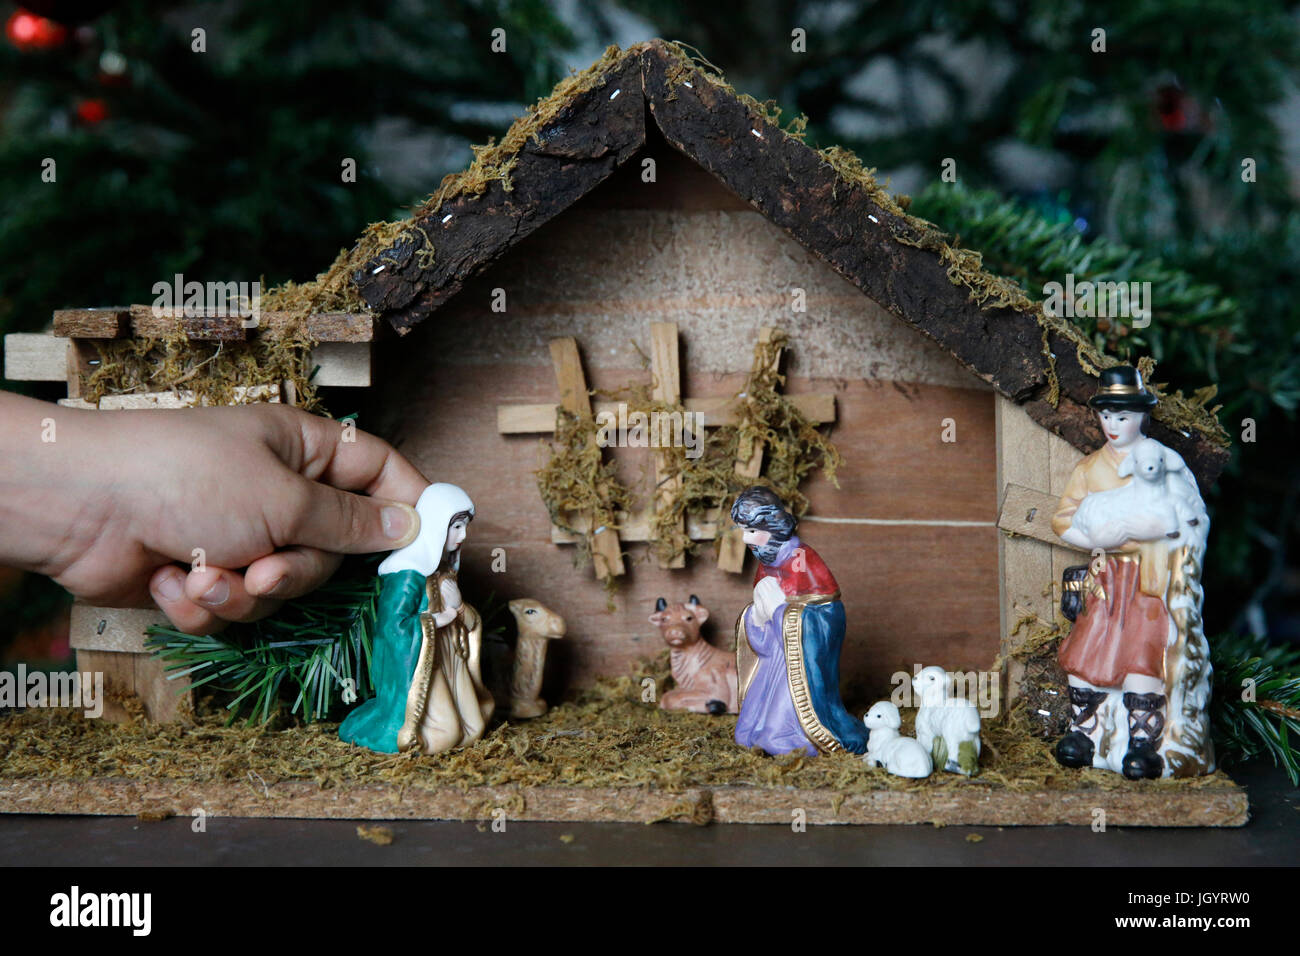 Creche De Noel High Resolution Stock Photography and Images - Alamy